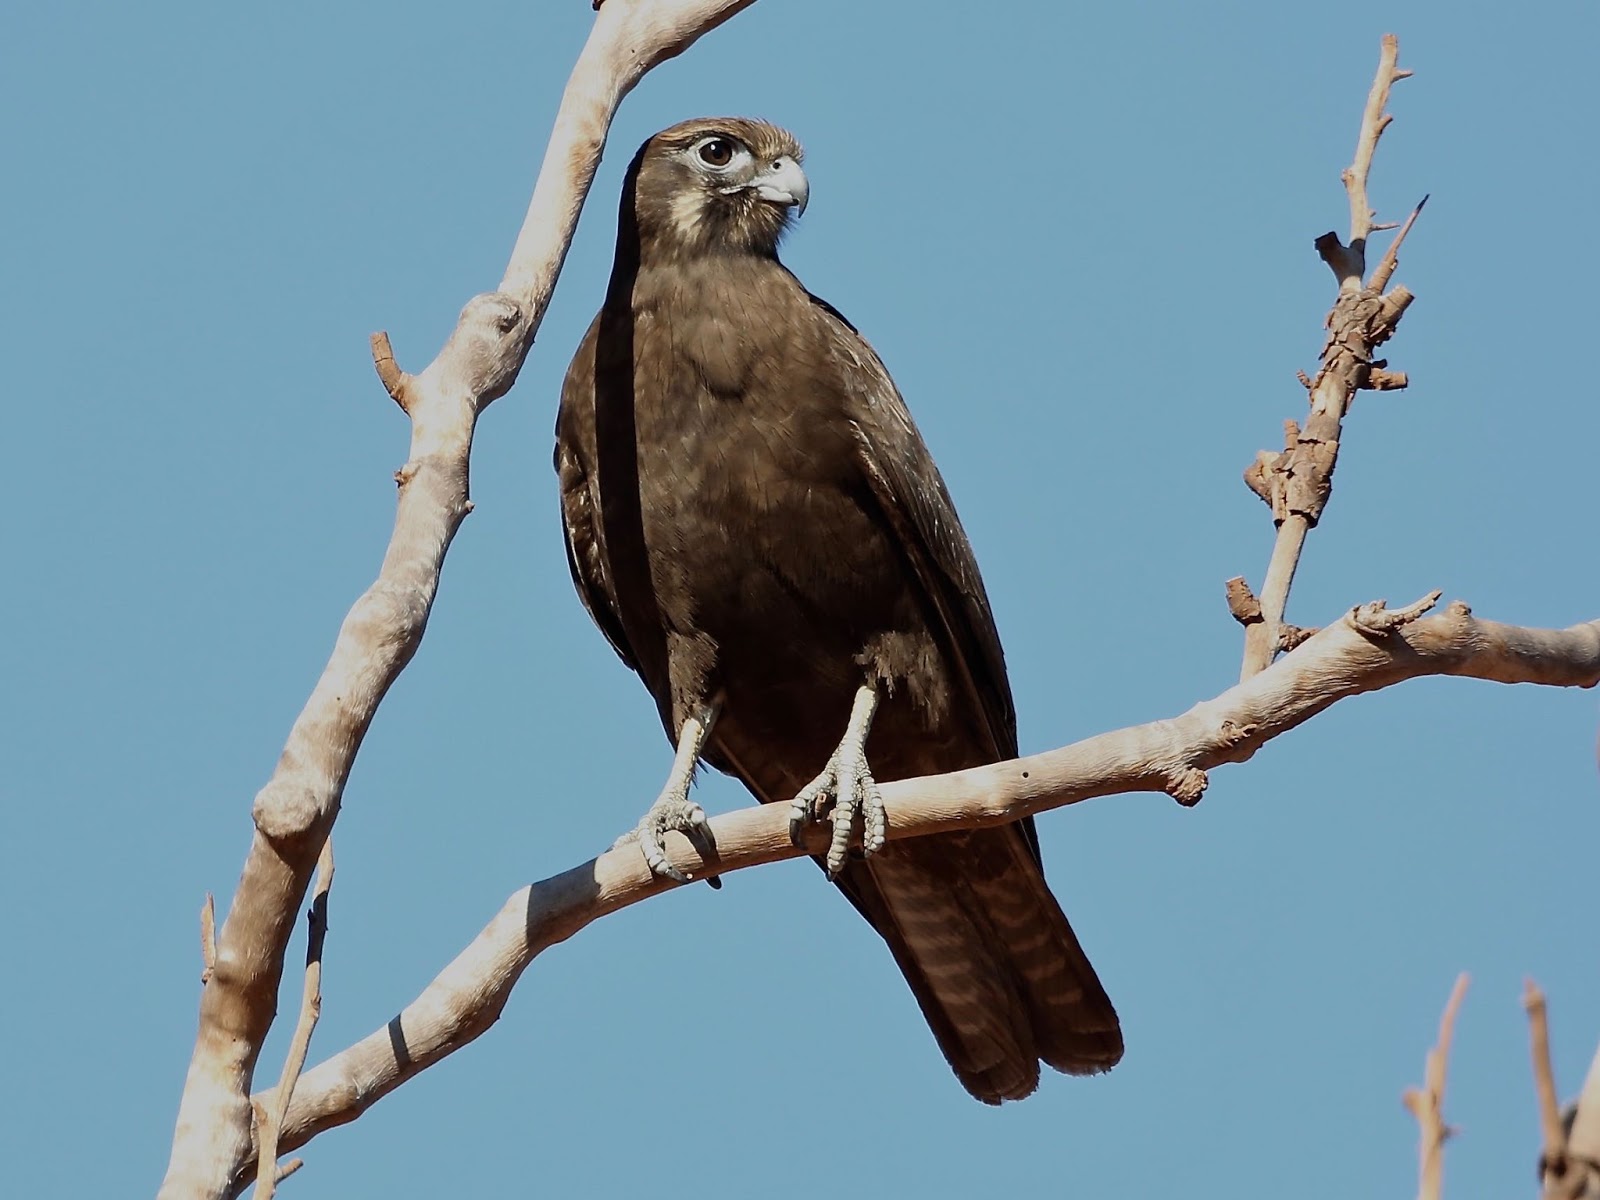 Avithera: Brown and not-so-brown Falcons